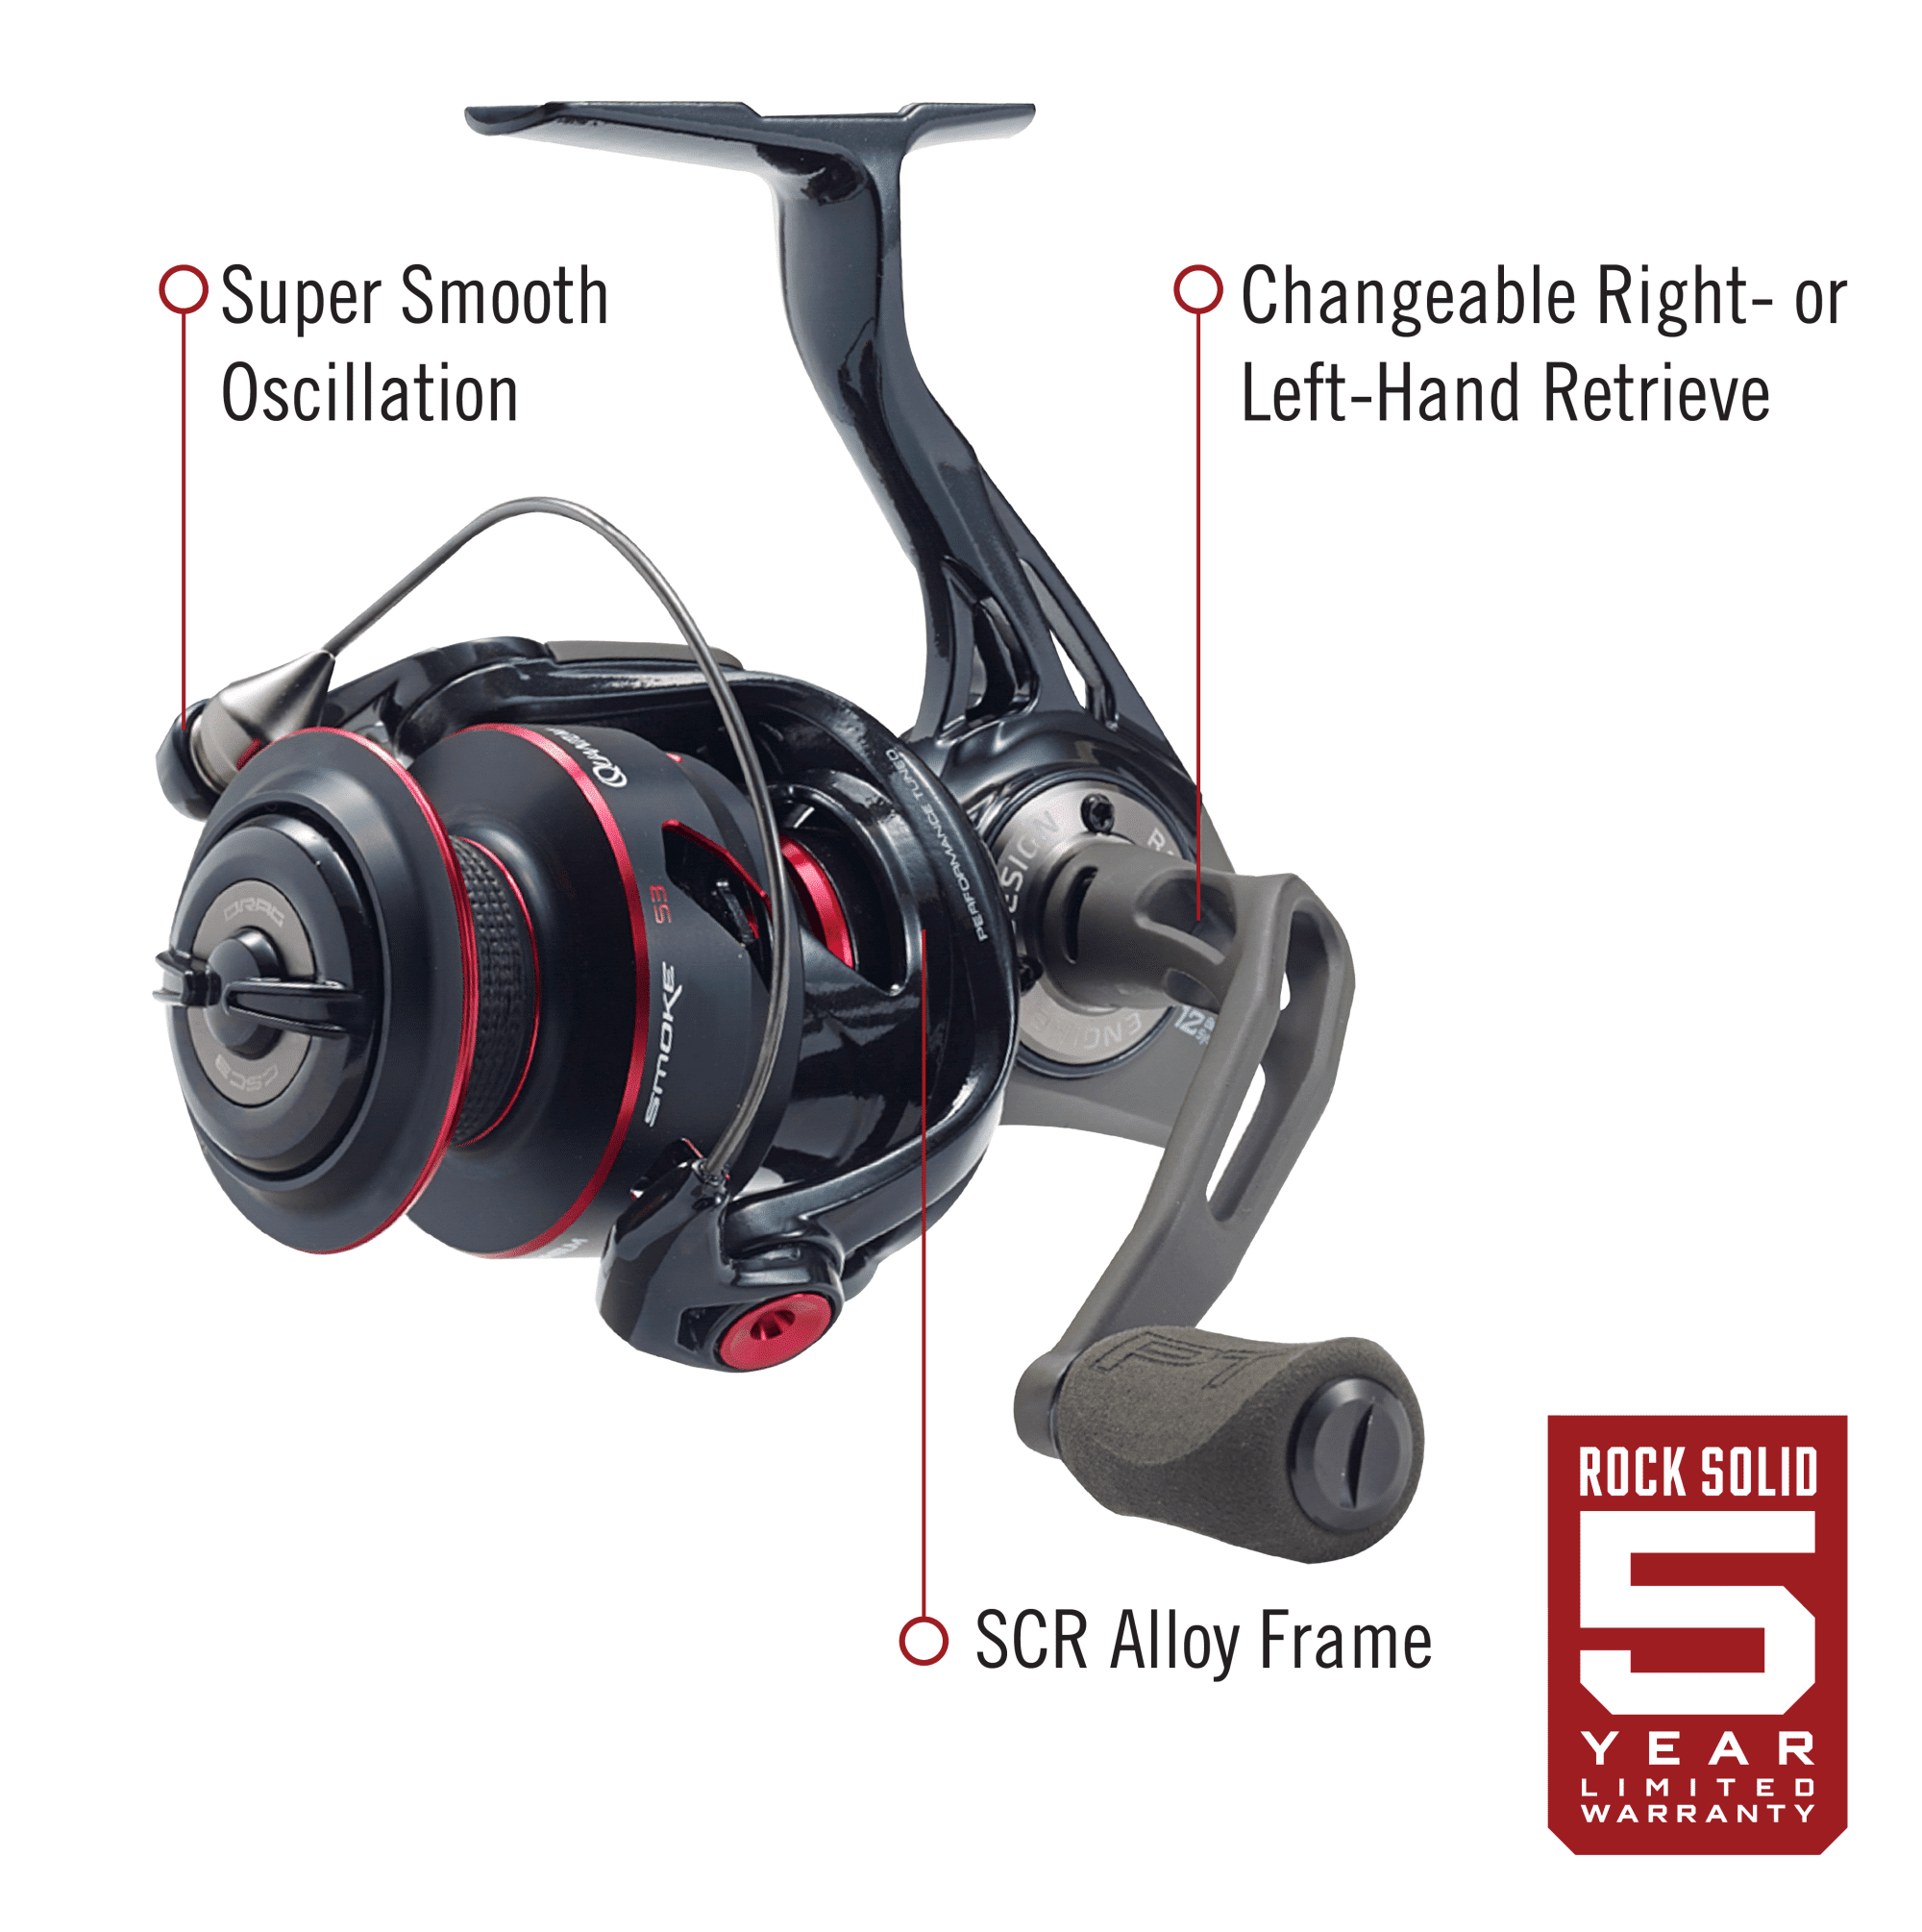 Quantum Smoke Spinning Fishing Reel, Size 15 Reel, Changeable Right- or  Left-Hand Retrieve, Continuous Anti-Reverse Clutch with NiTi Indestructible  Bail, SCR Alloy Frame, 5.7:1 Gear Ratio, Black 